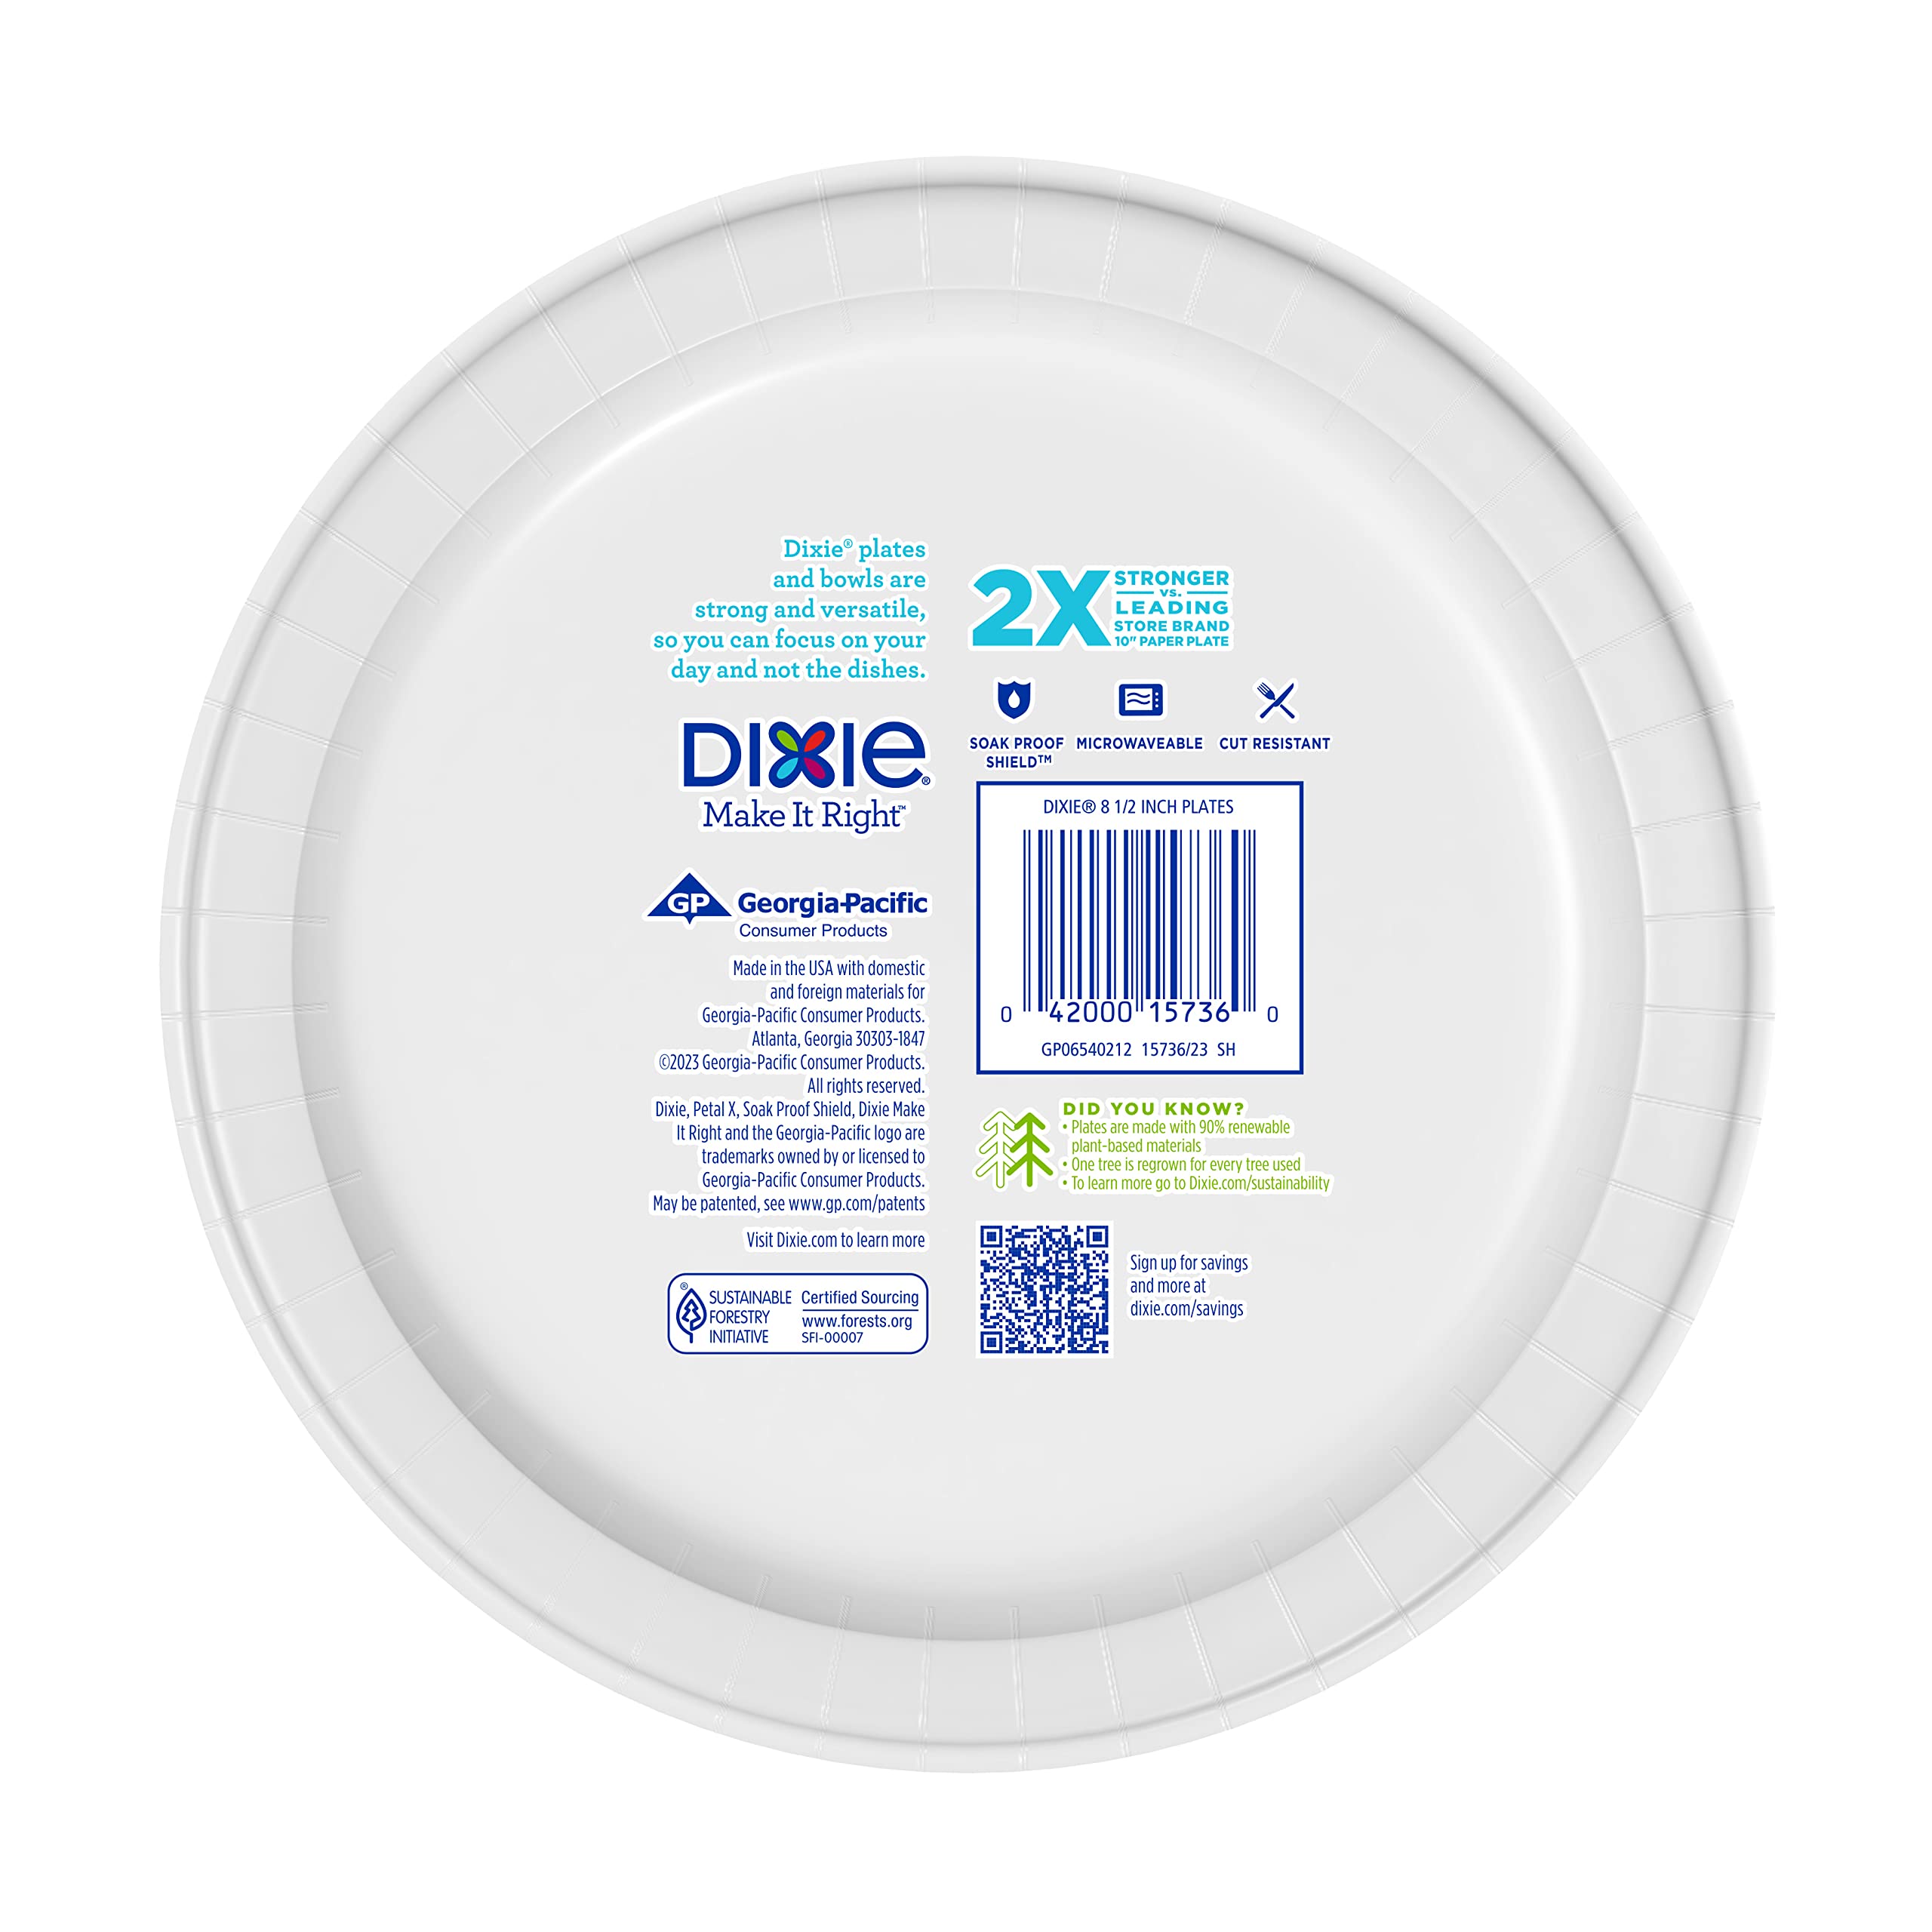 Dixie Paper Plates, 8 1/2 inch, Dinner Size Printed Disposable Plate, 90 Count